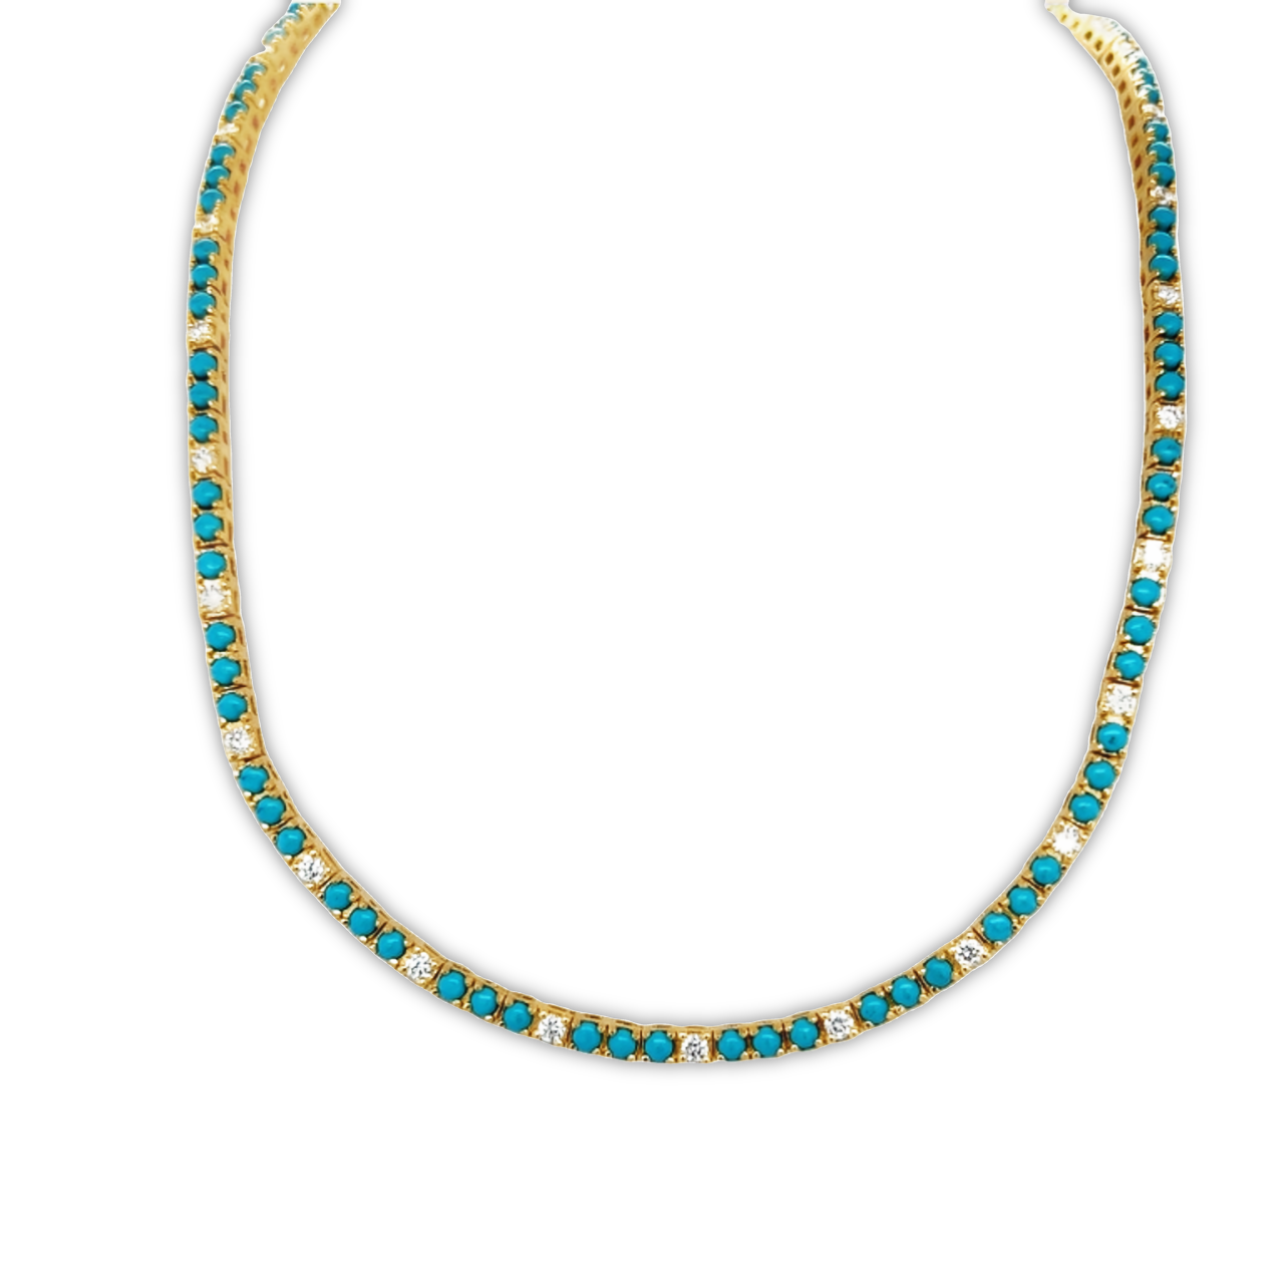 Featured image for “Diamond and Turquoise Collar”